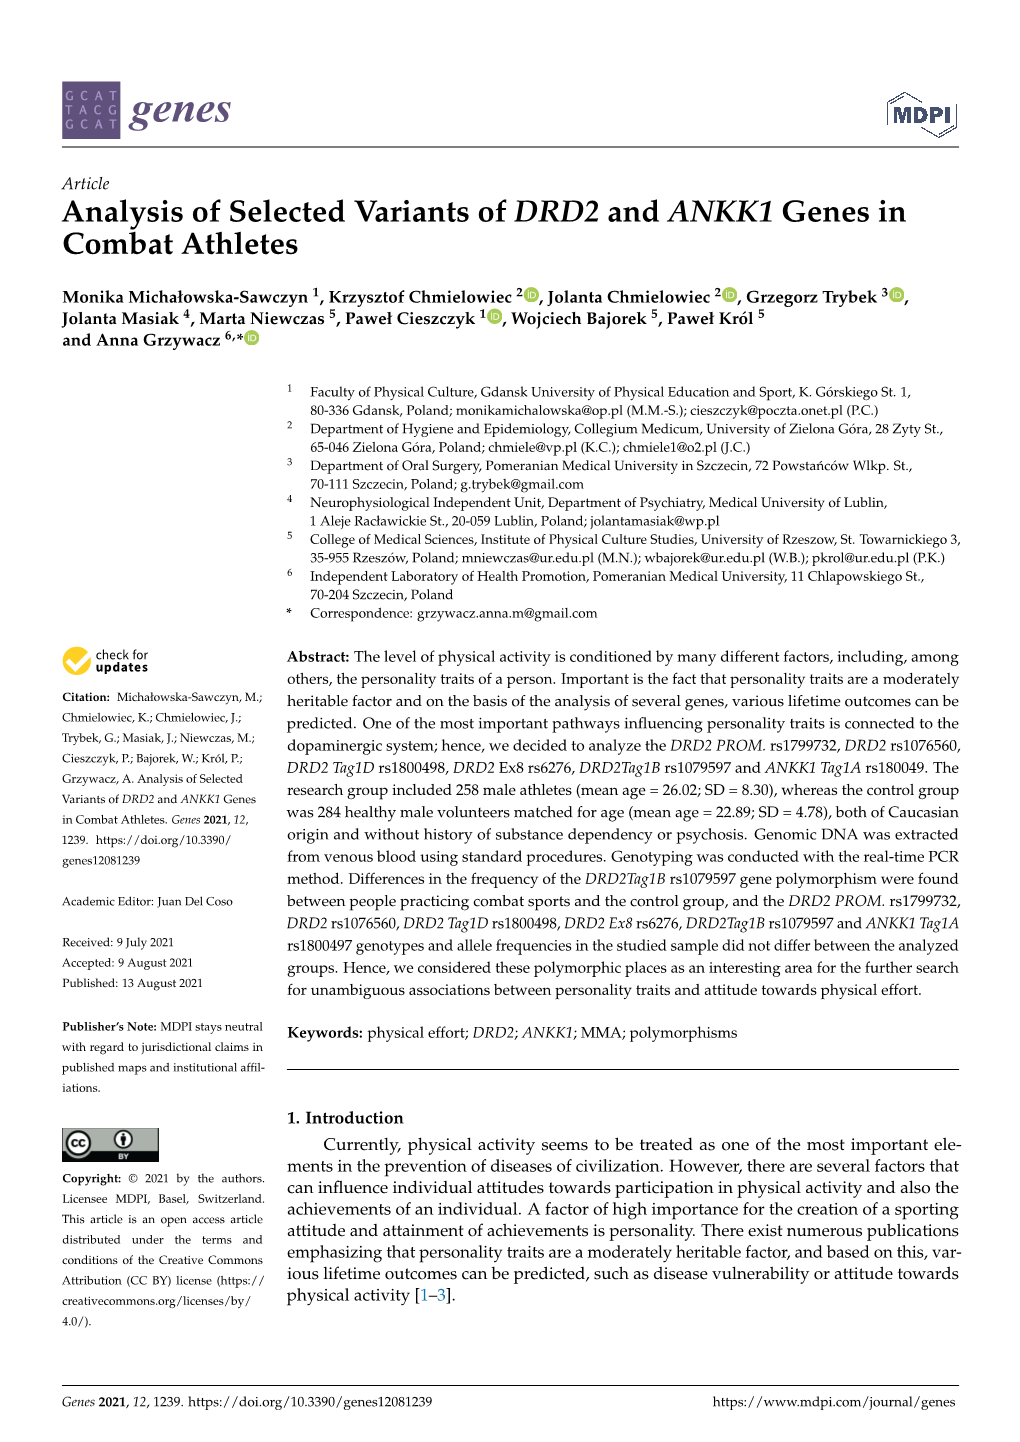 Analysis of Selected Variants of DRD2 and ANKK1 Genes in Combat Athletes